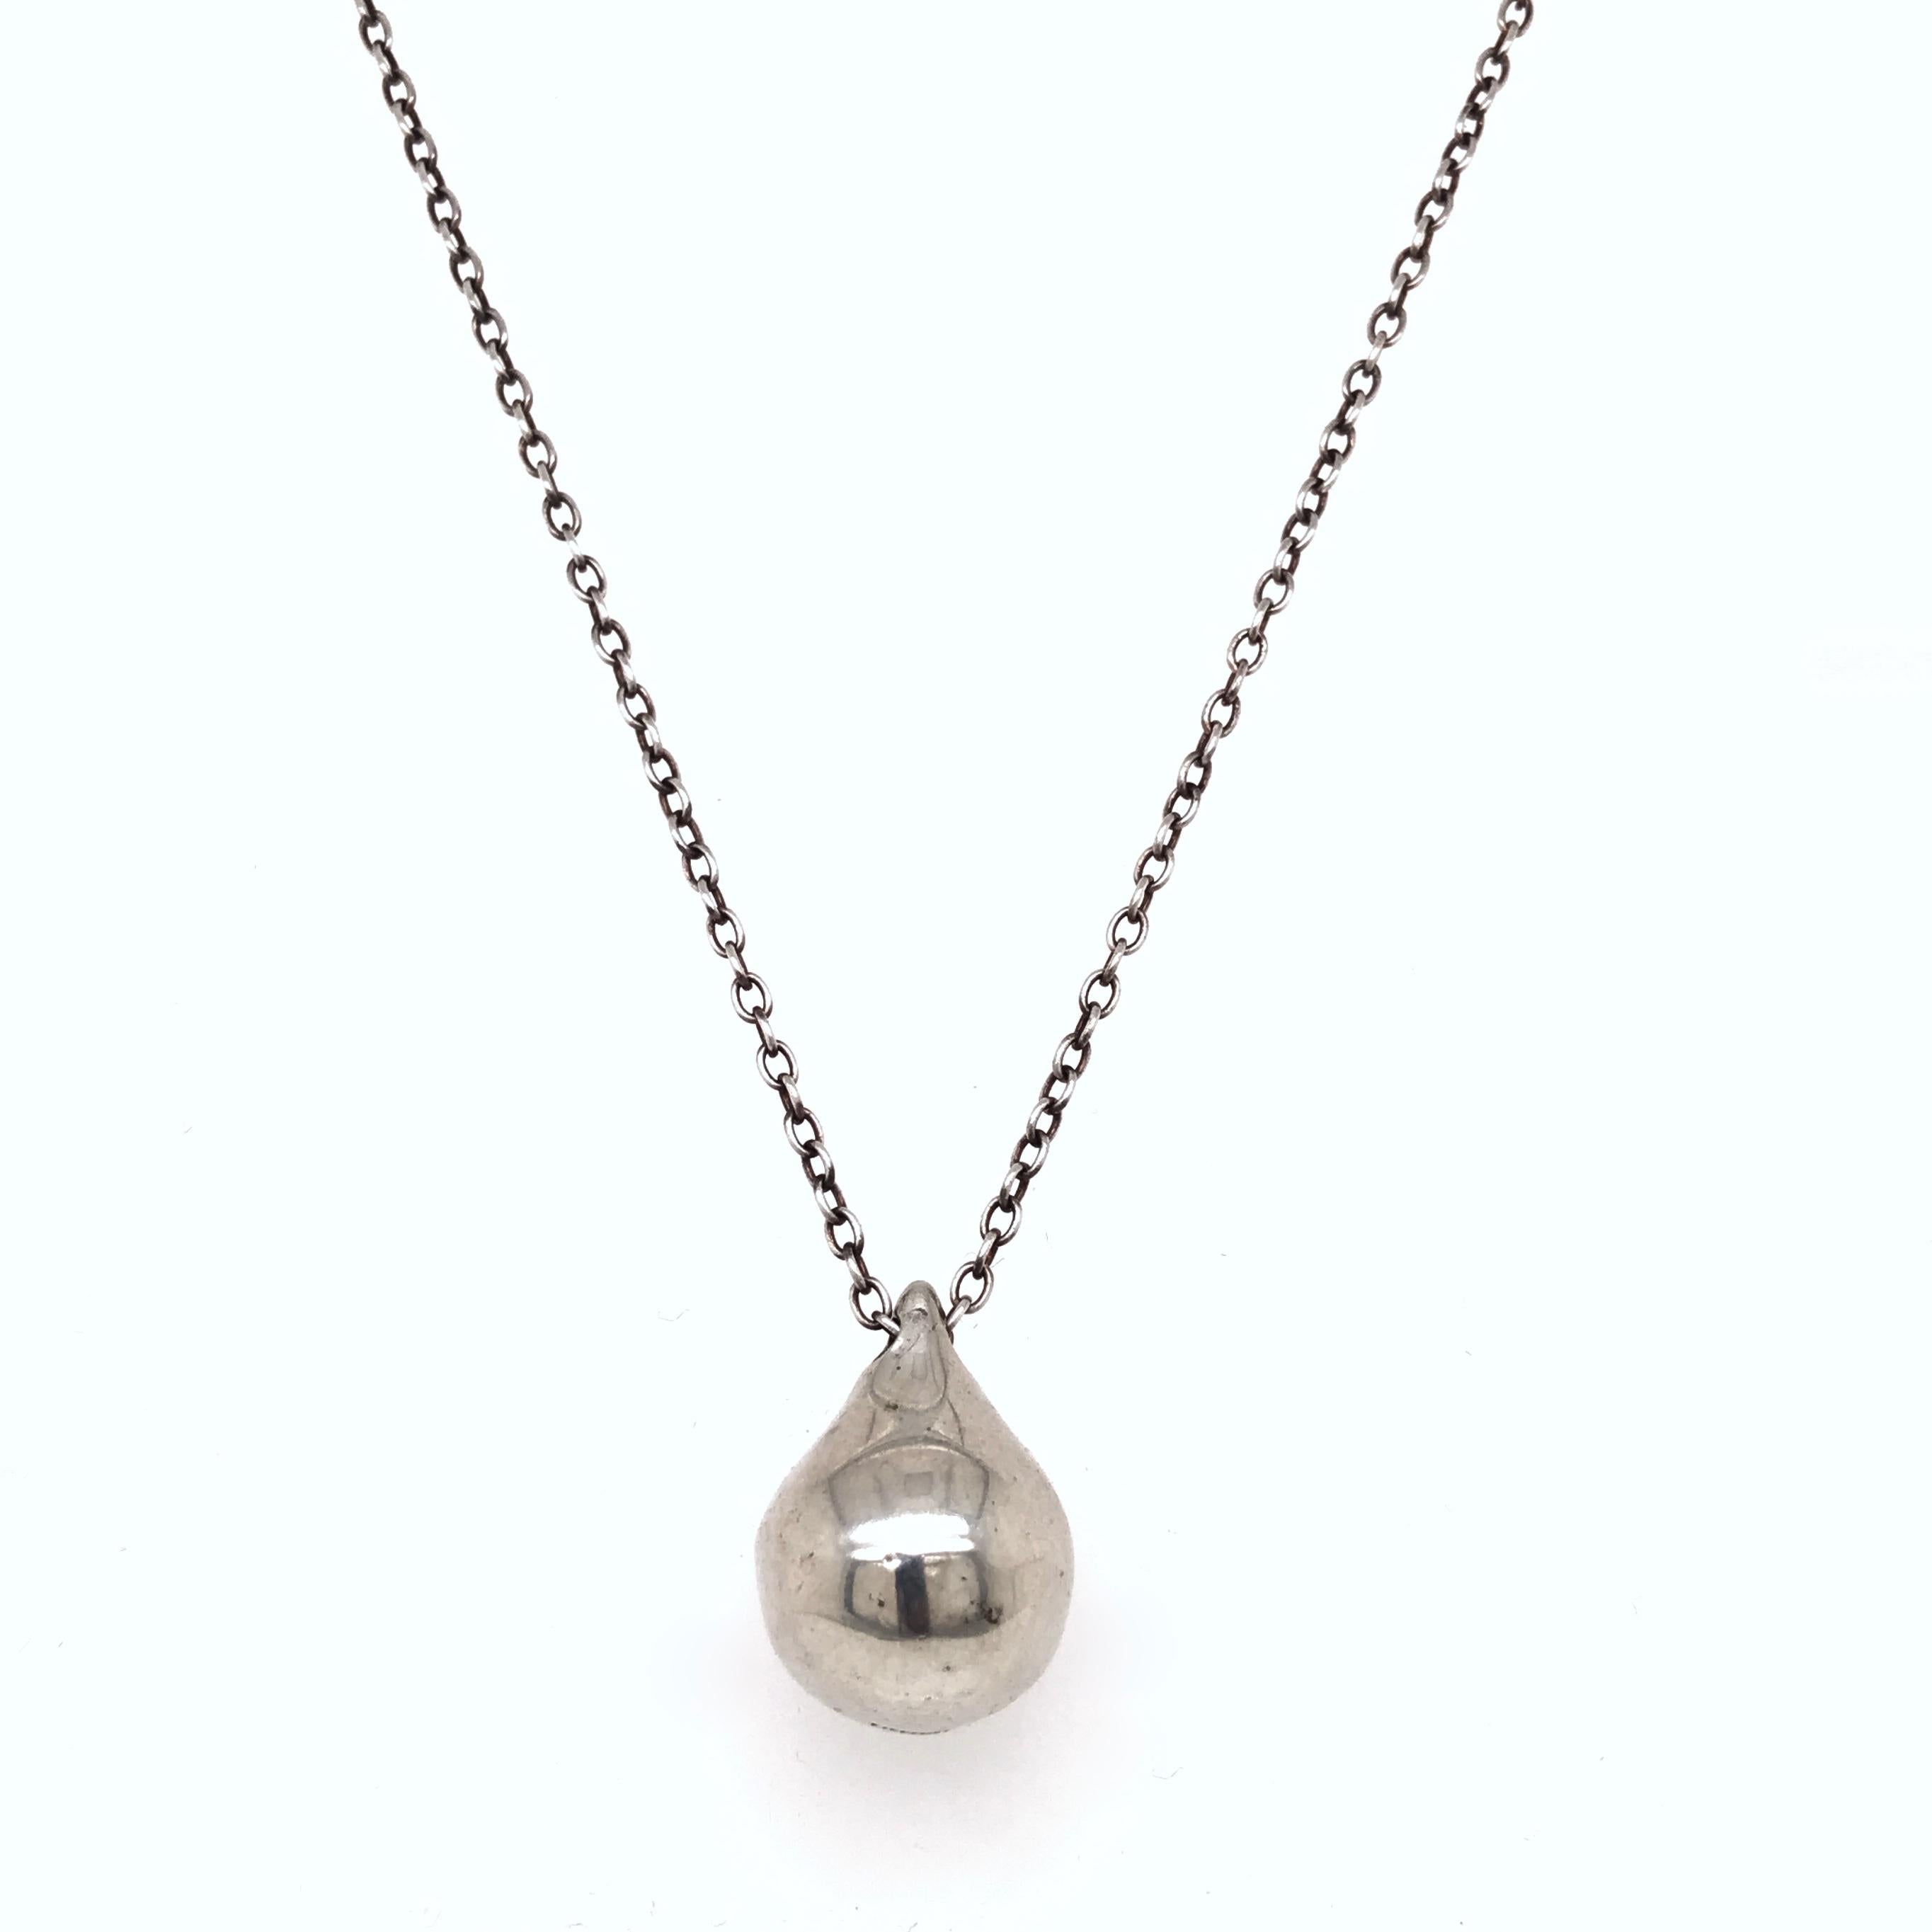 A very fine Tiffany & Co. tear drop pendant necklace.

By Elsa Peretti in sterling silver.

Marked for Tiffany & Co and Sterling for silver fineness.

Overall Length: ca. 520 mm (or ca. 20 1/2 in.)
Pendant Width: ca. 13 mm
Pendant Length: ca. 18